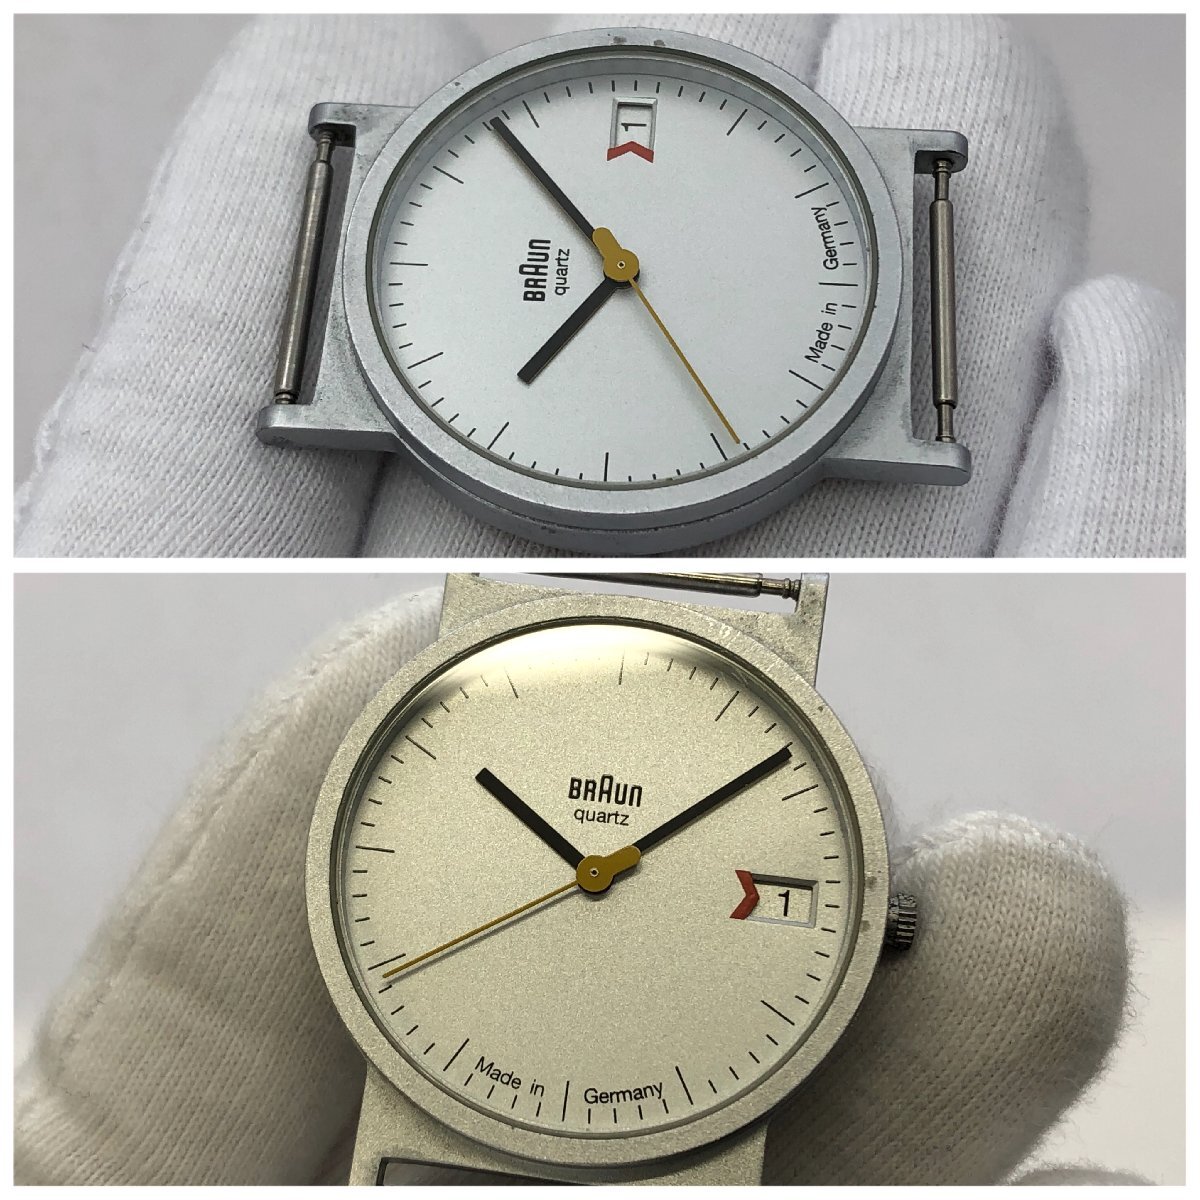 1 jpy ~/BRAUN/ Brown /3 802/Made in Germany/ 3 hands / Date / silver face / silver color / round / quartz / men's wristwatch / Junk /T135